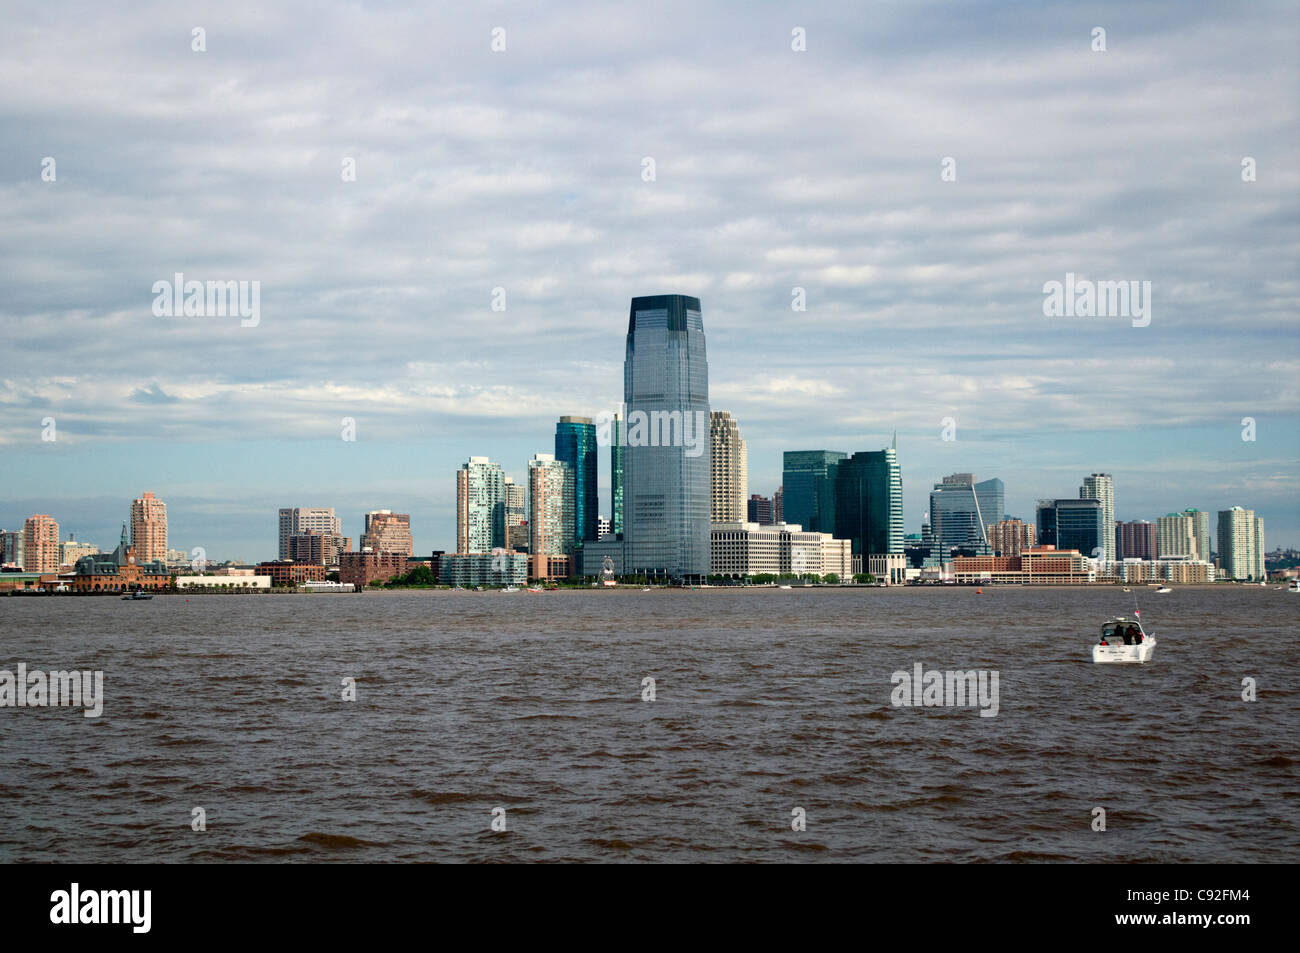 Jersey City skyscrapers (Goldman Sachs 30 Hudson Street) muddy water aftermath of storm Irene (August 28 2011) Stock Photo